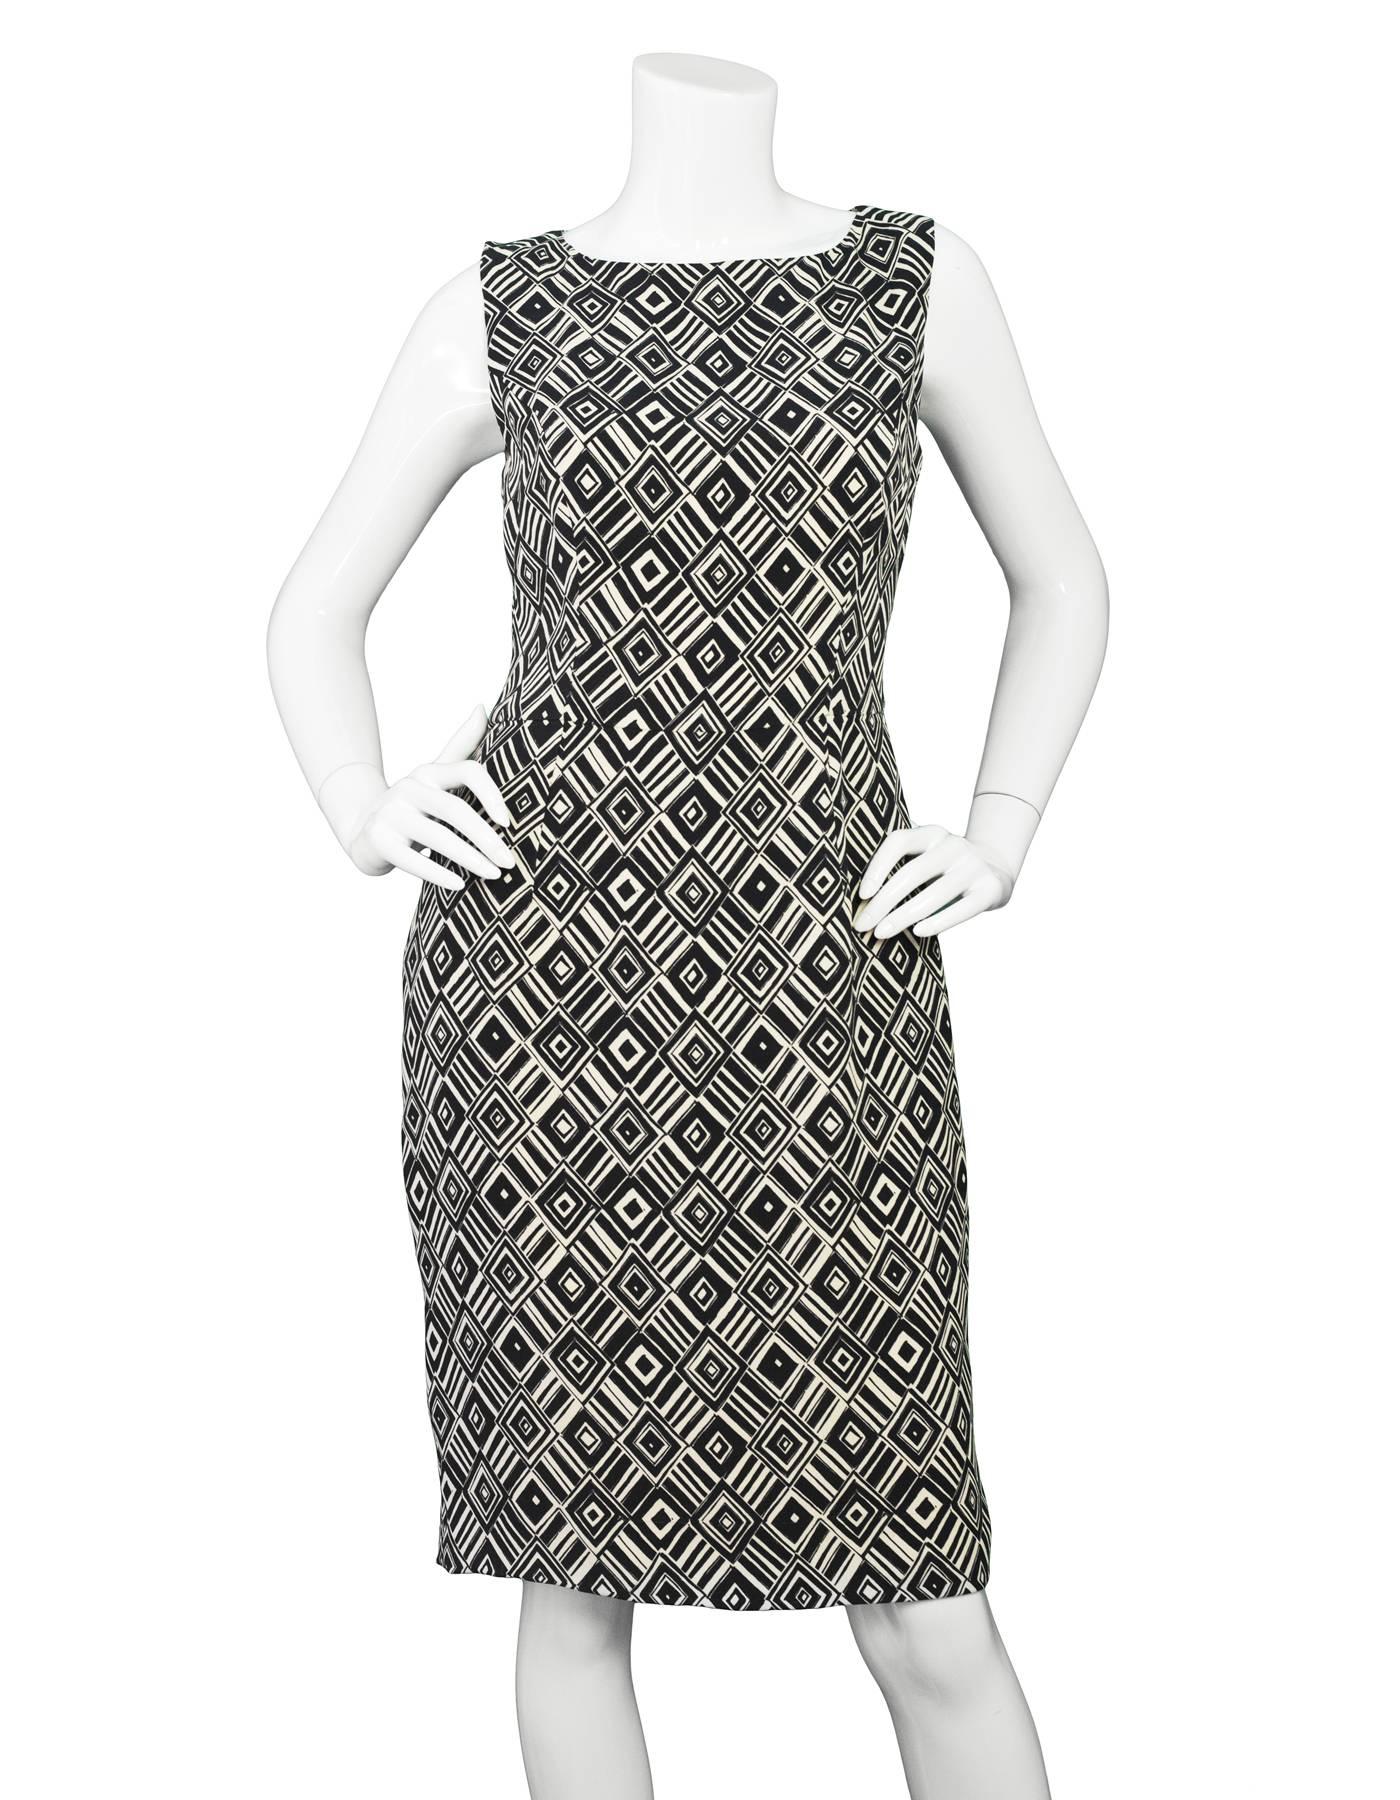 Christian Dior Black & Ivory Silk Sheath Dress Sz 8

Made In: Italy
Color: Black, ivory
Composition: 100% Silk
Lining: Nude silk
Closure/Opening: Zip closure at back
Exterior Pockets: None
Interior Pockets: None
Overall Condition: Excellent